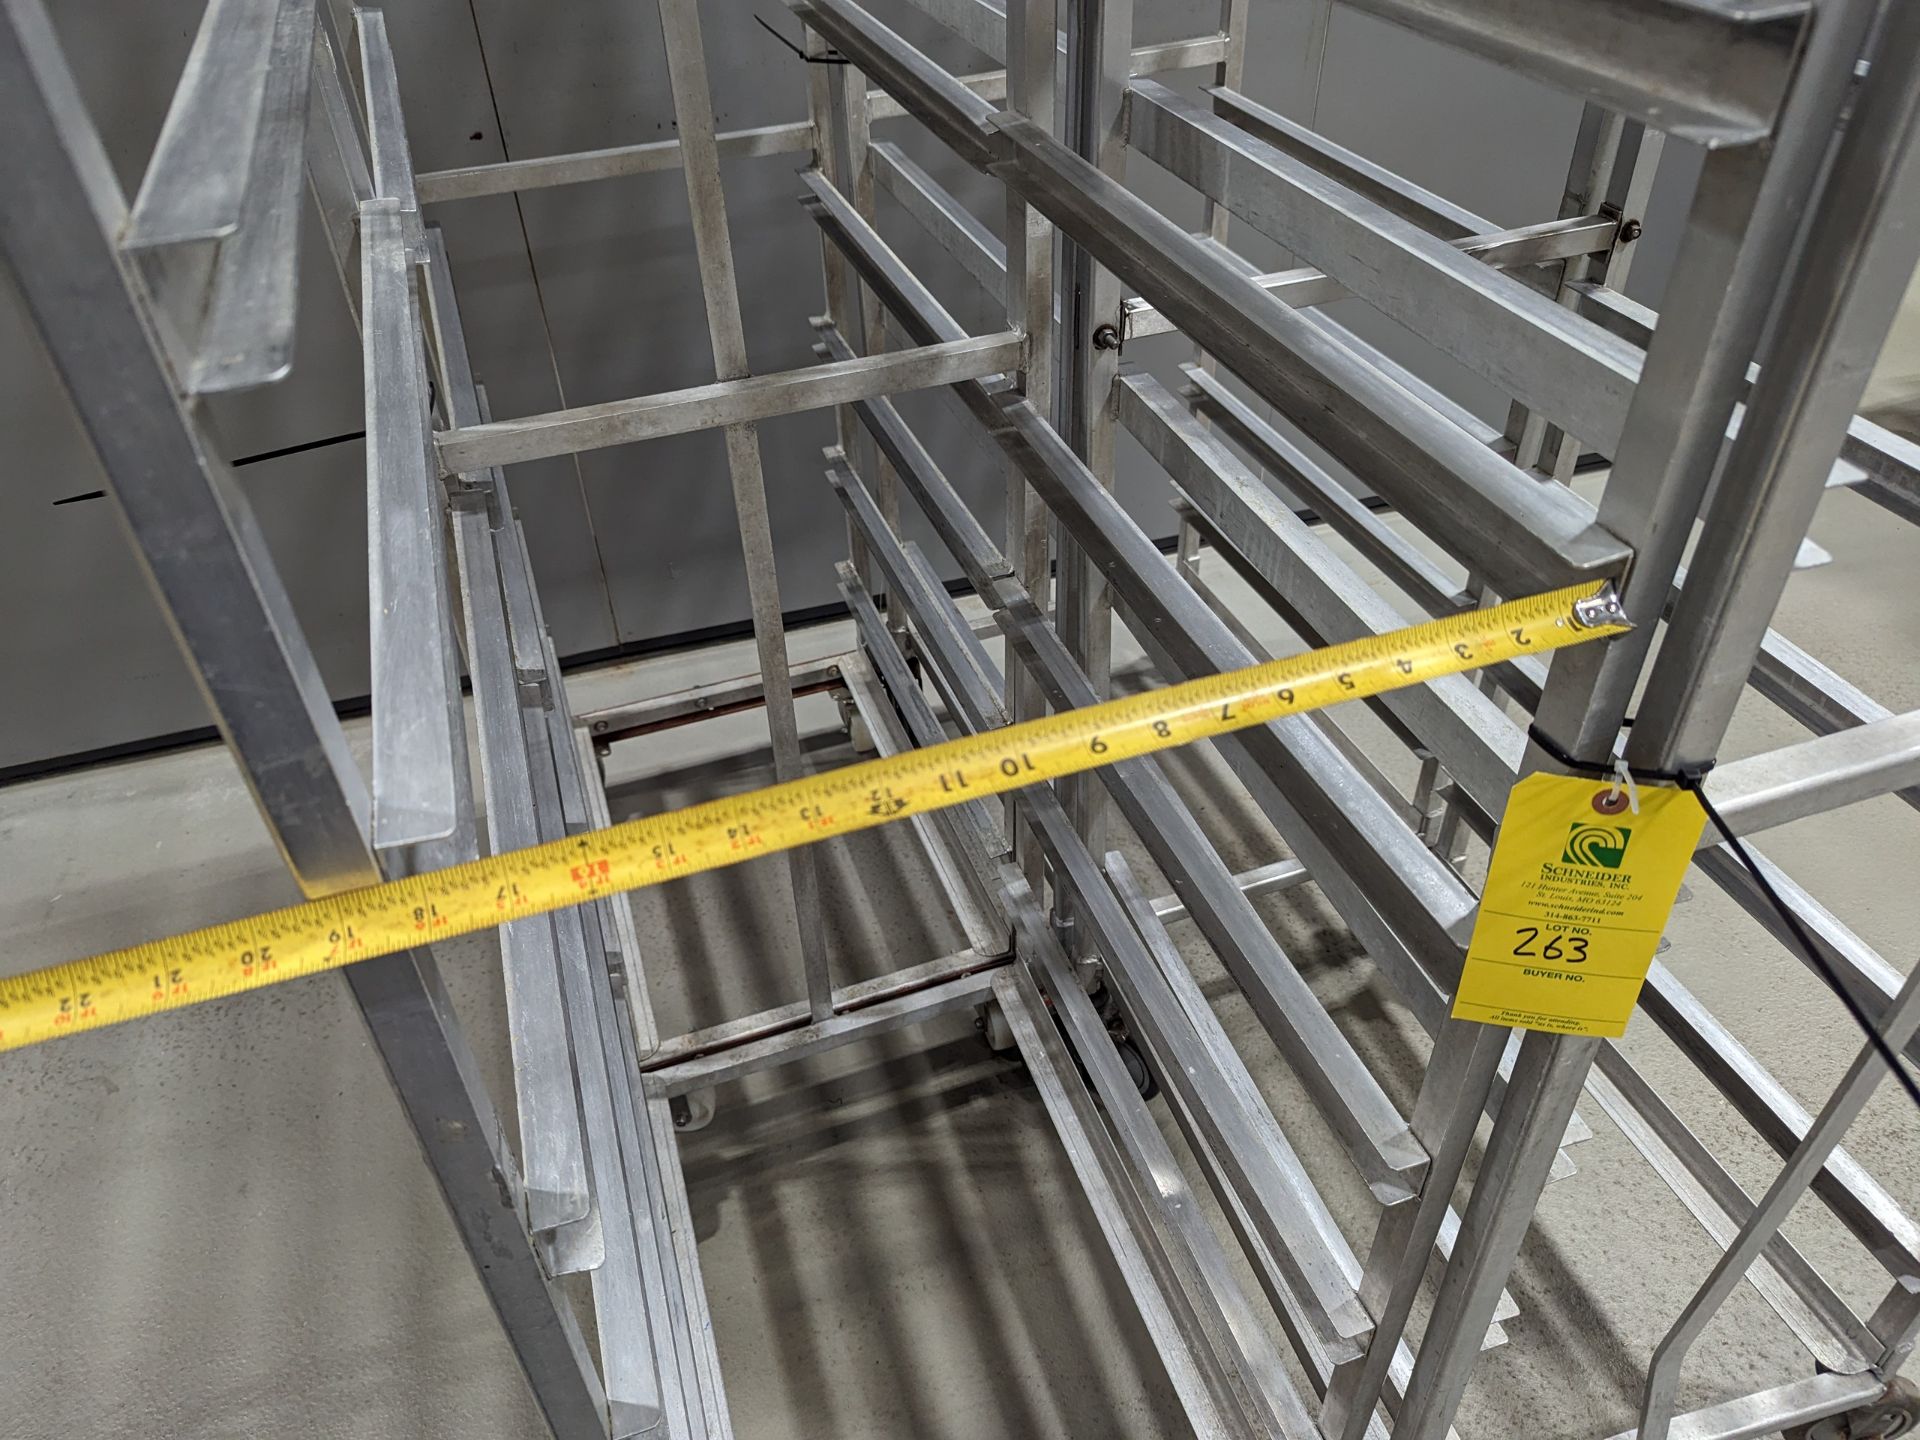 Lot of 4 Single Wide Aluminum Bakery Racks, Dimensions LxWxH: 57x37.5x69 Measurements are for lot - Image 5 of 7